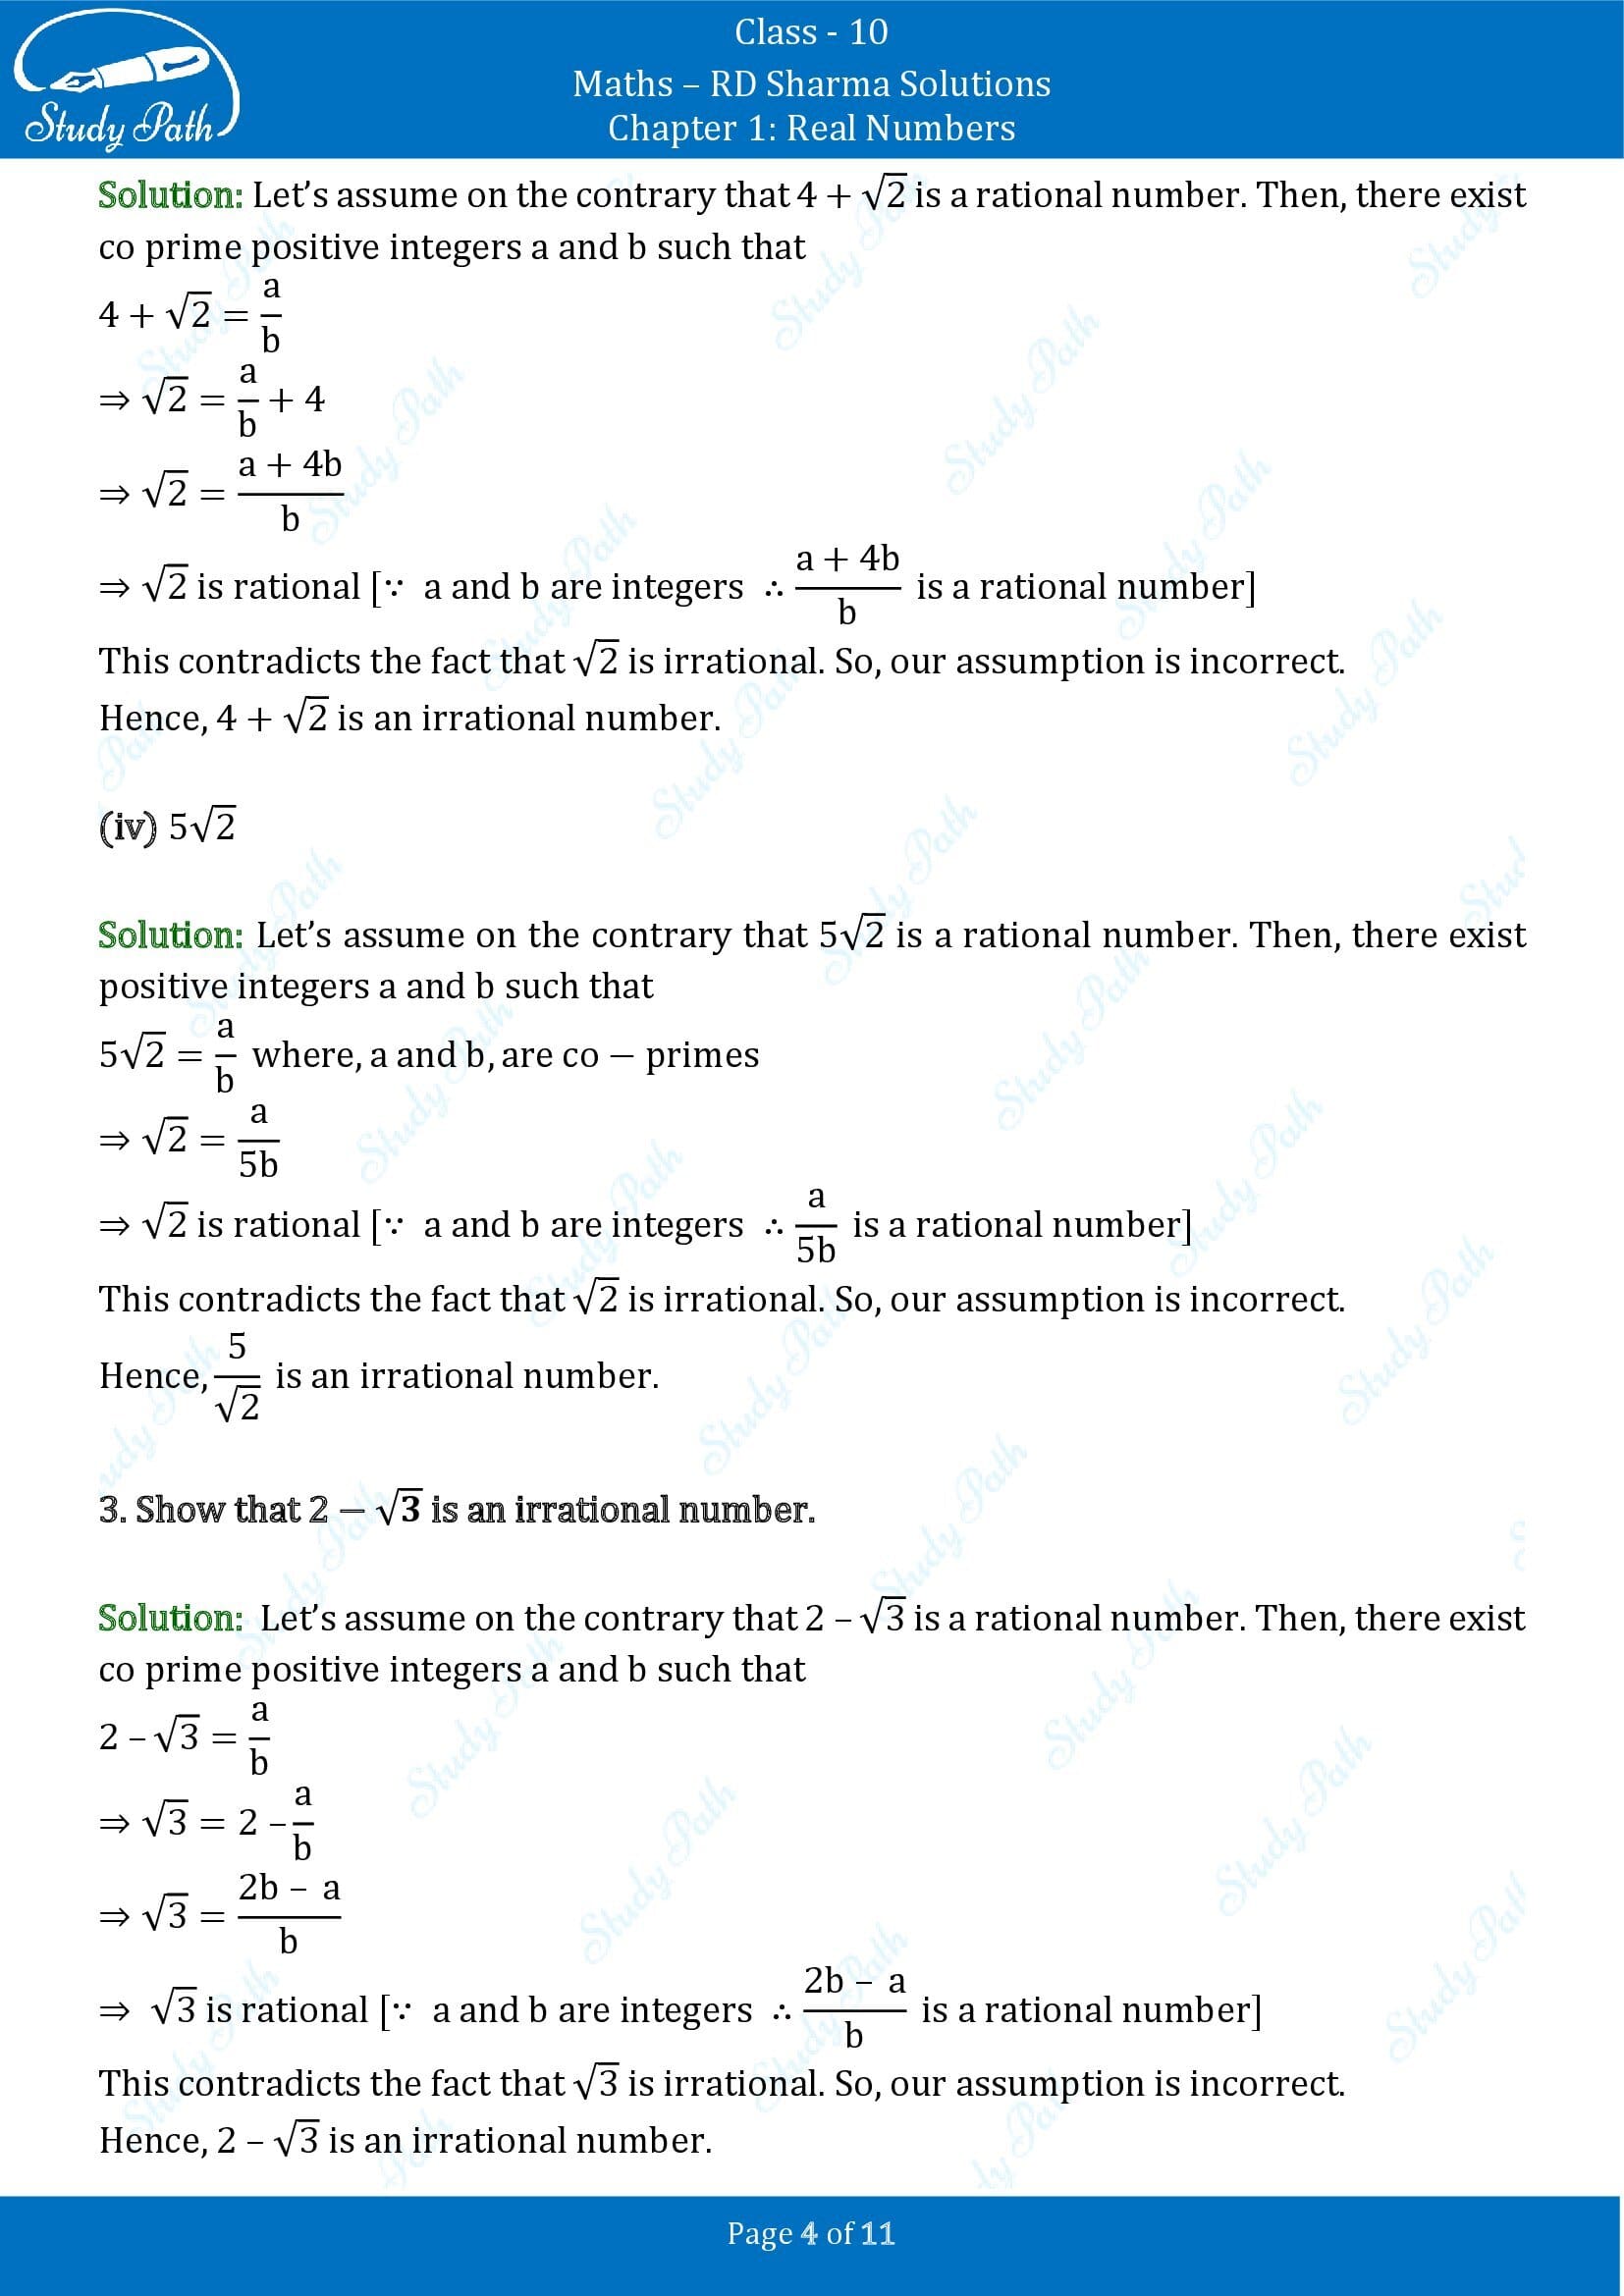 RD Sharma Solutions Class 10 Chapter 1 Real Numbers Exercise 1.5 00004